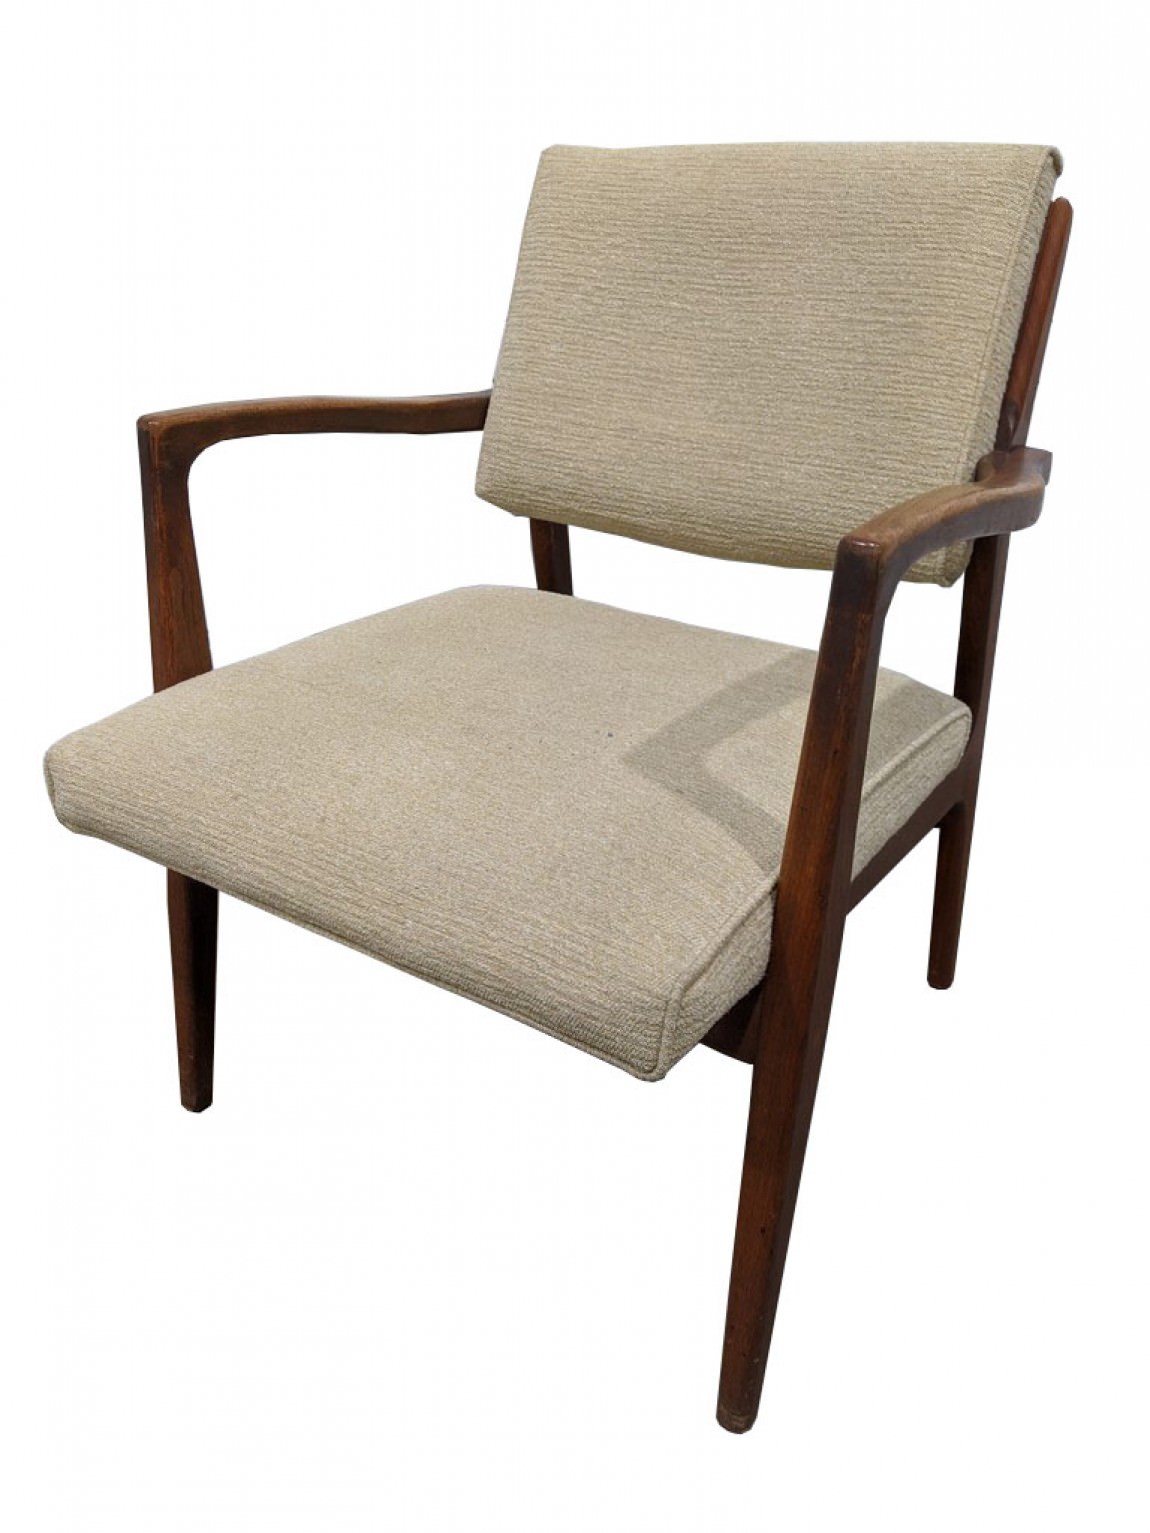 Tan Fabric Guest Chairs with Wood Frame